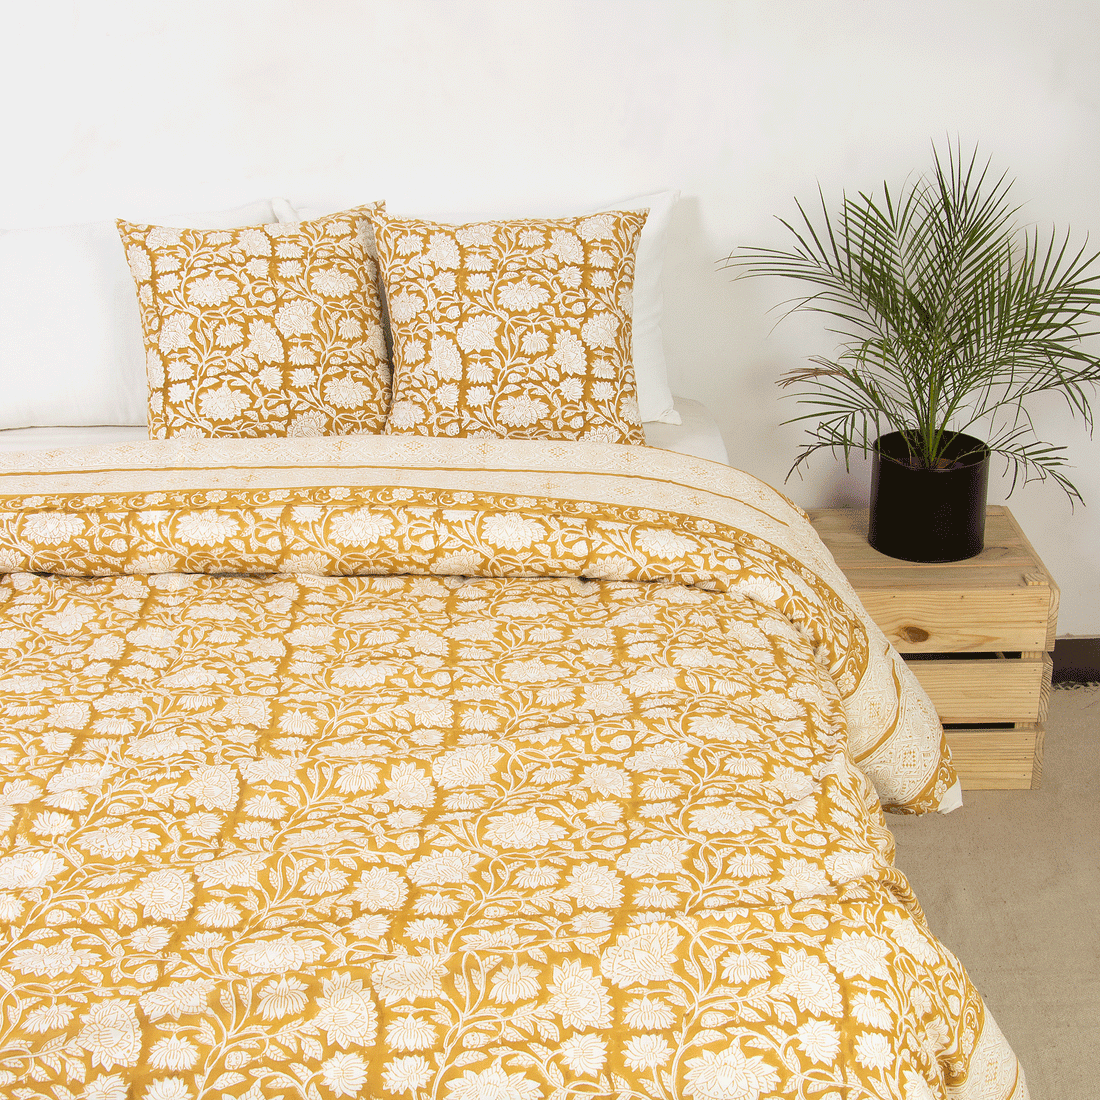 Royal Yellow Soft Cotton Duvet Cover With Shams